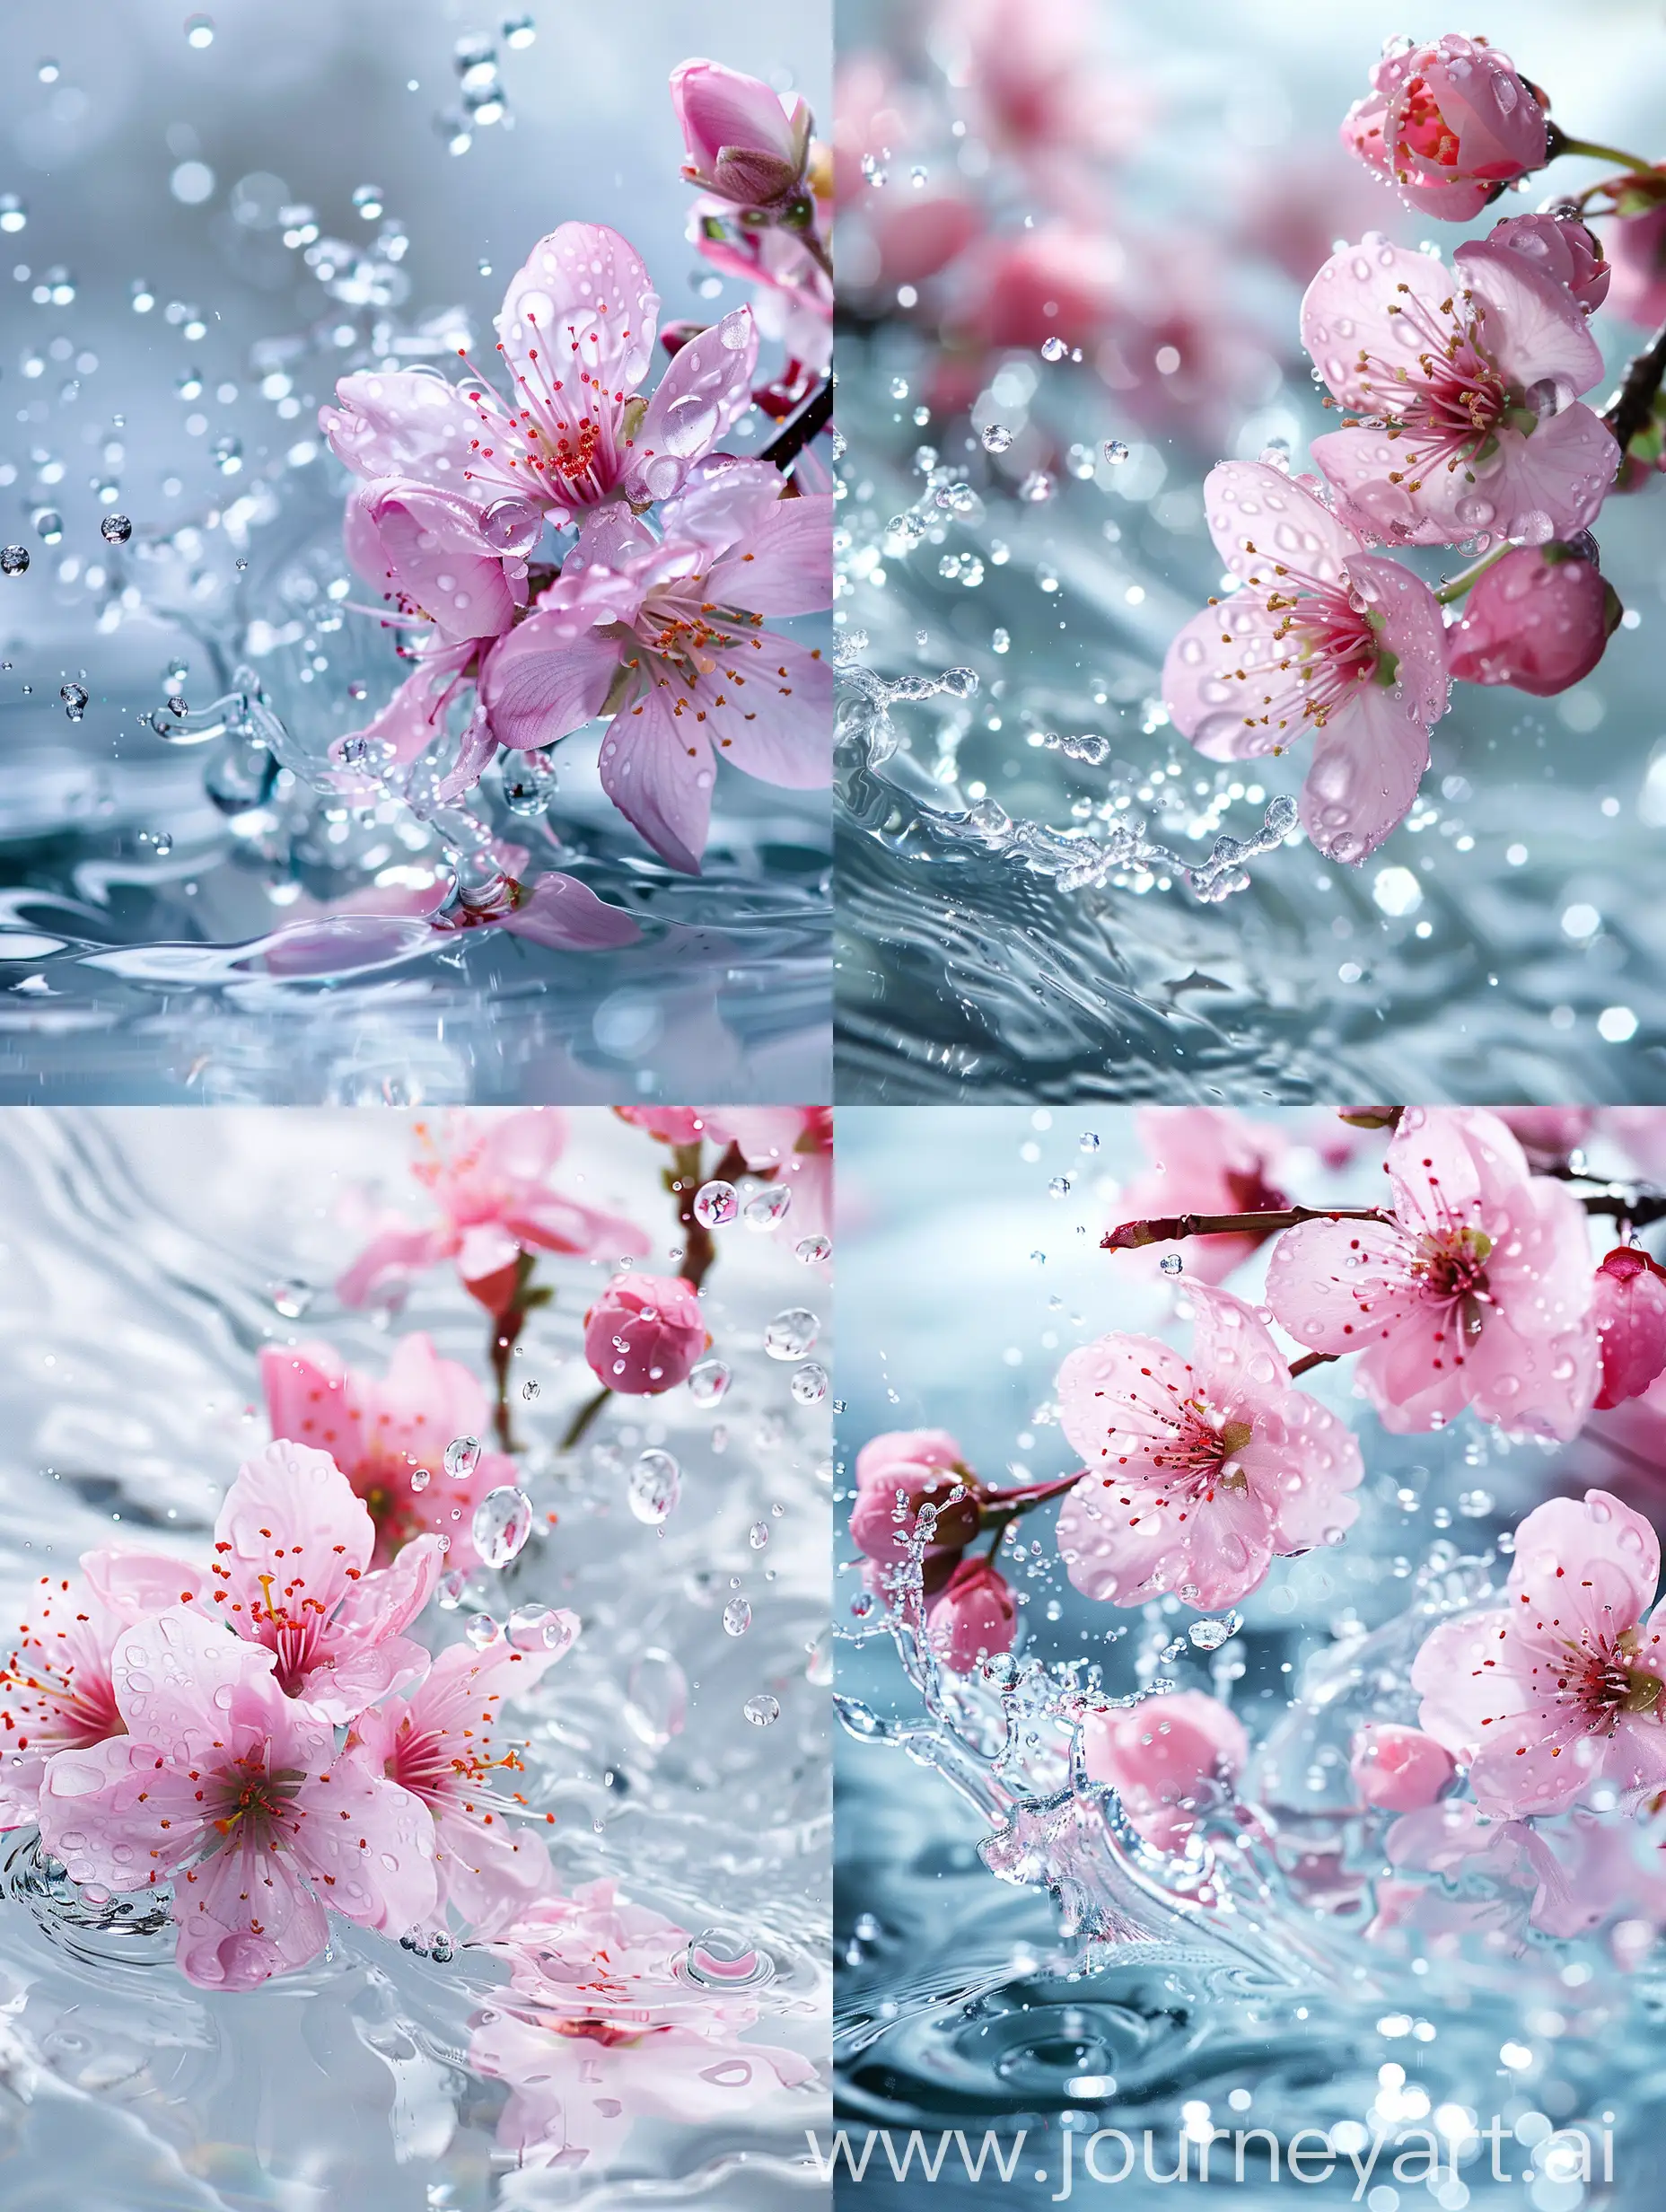 Serene-Pink-Peach-Blossoms-Reflecting-in-CrystalClear-Water